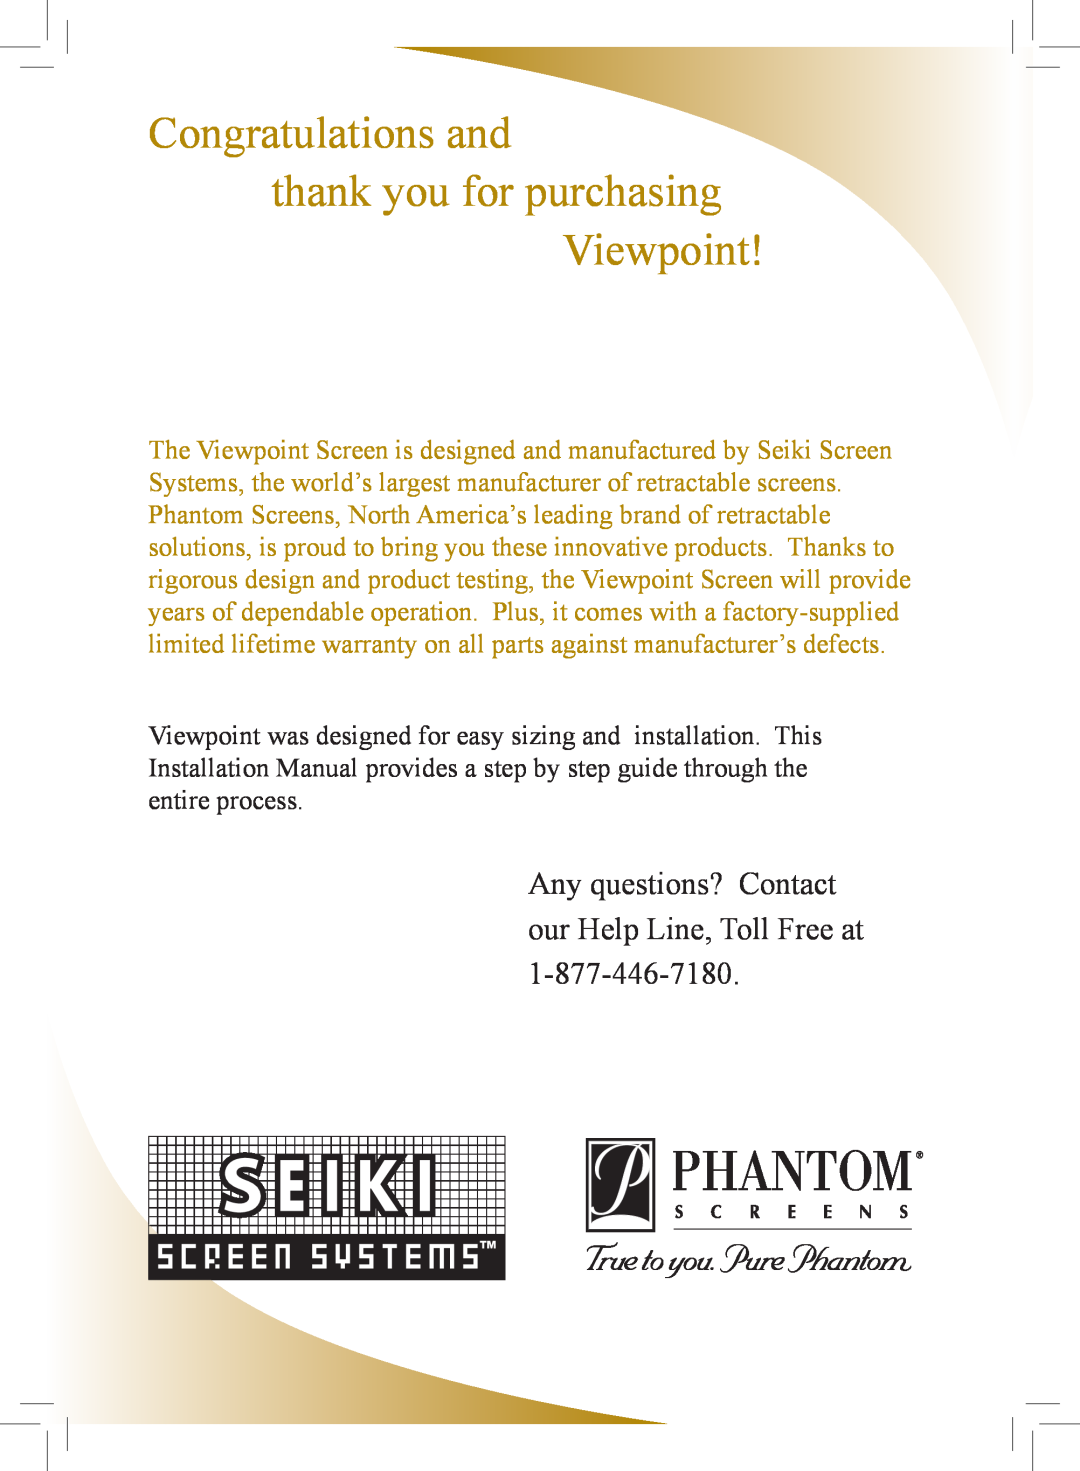 Phantom Tech VI0508 installation manual Congratulations and thank you for purchasing, Viewpoint 